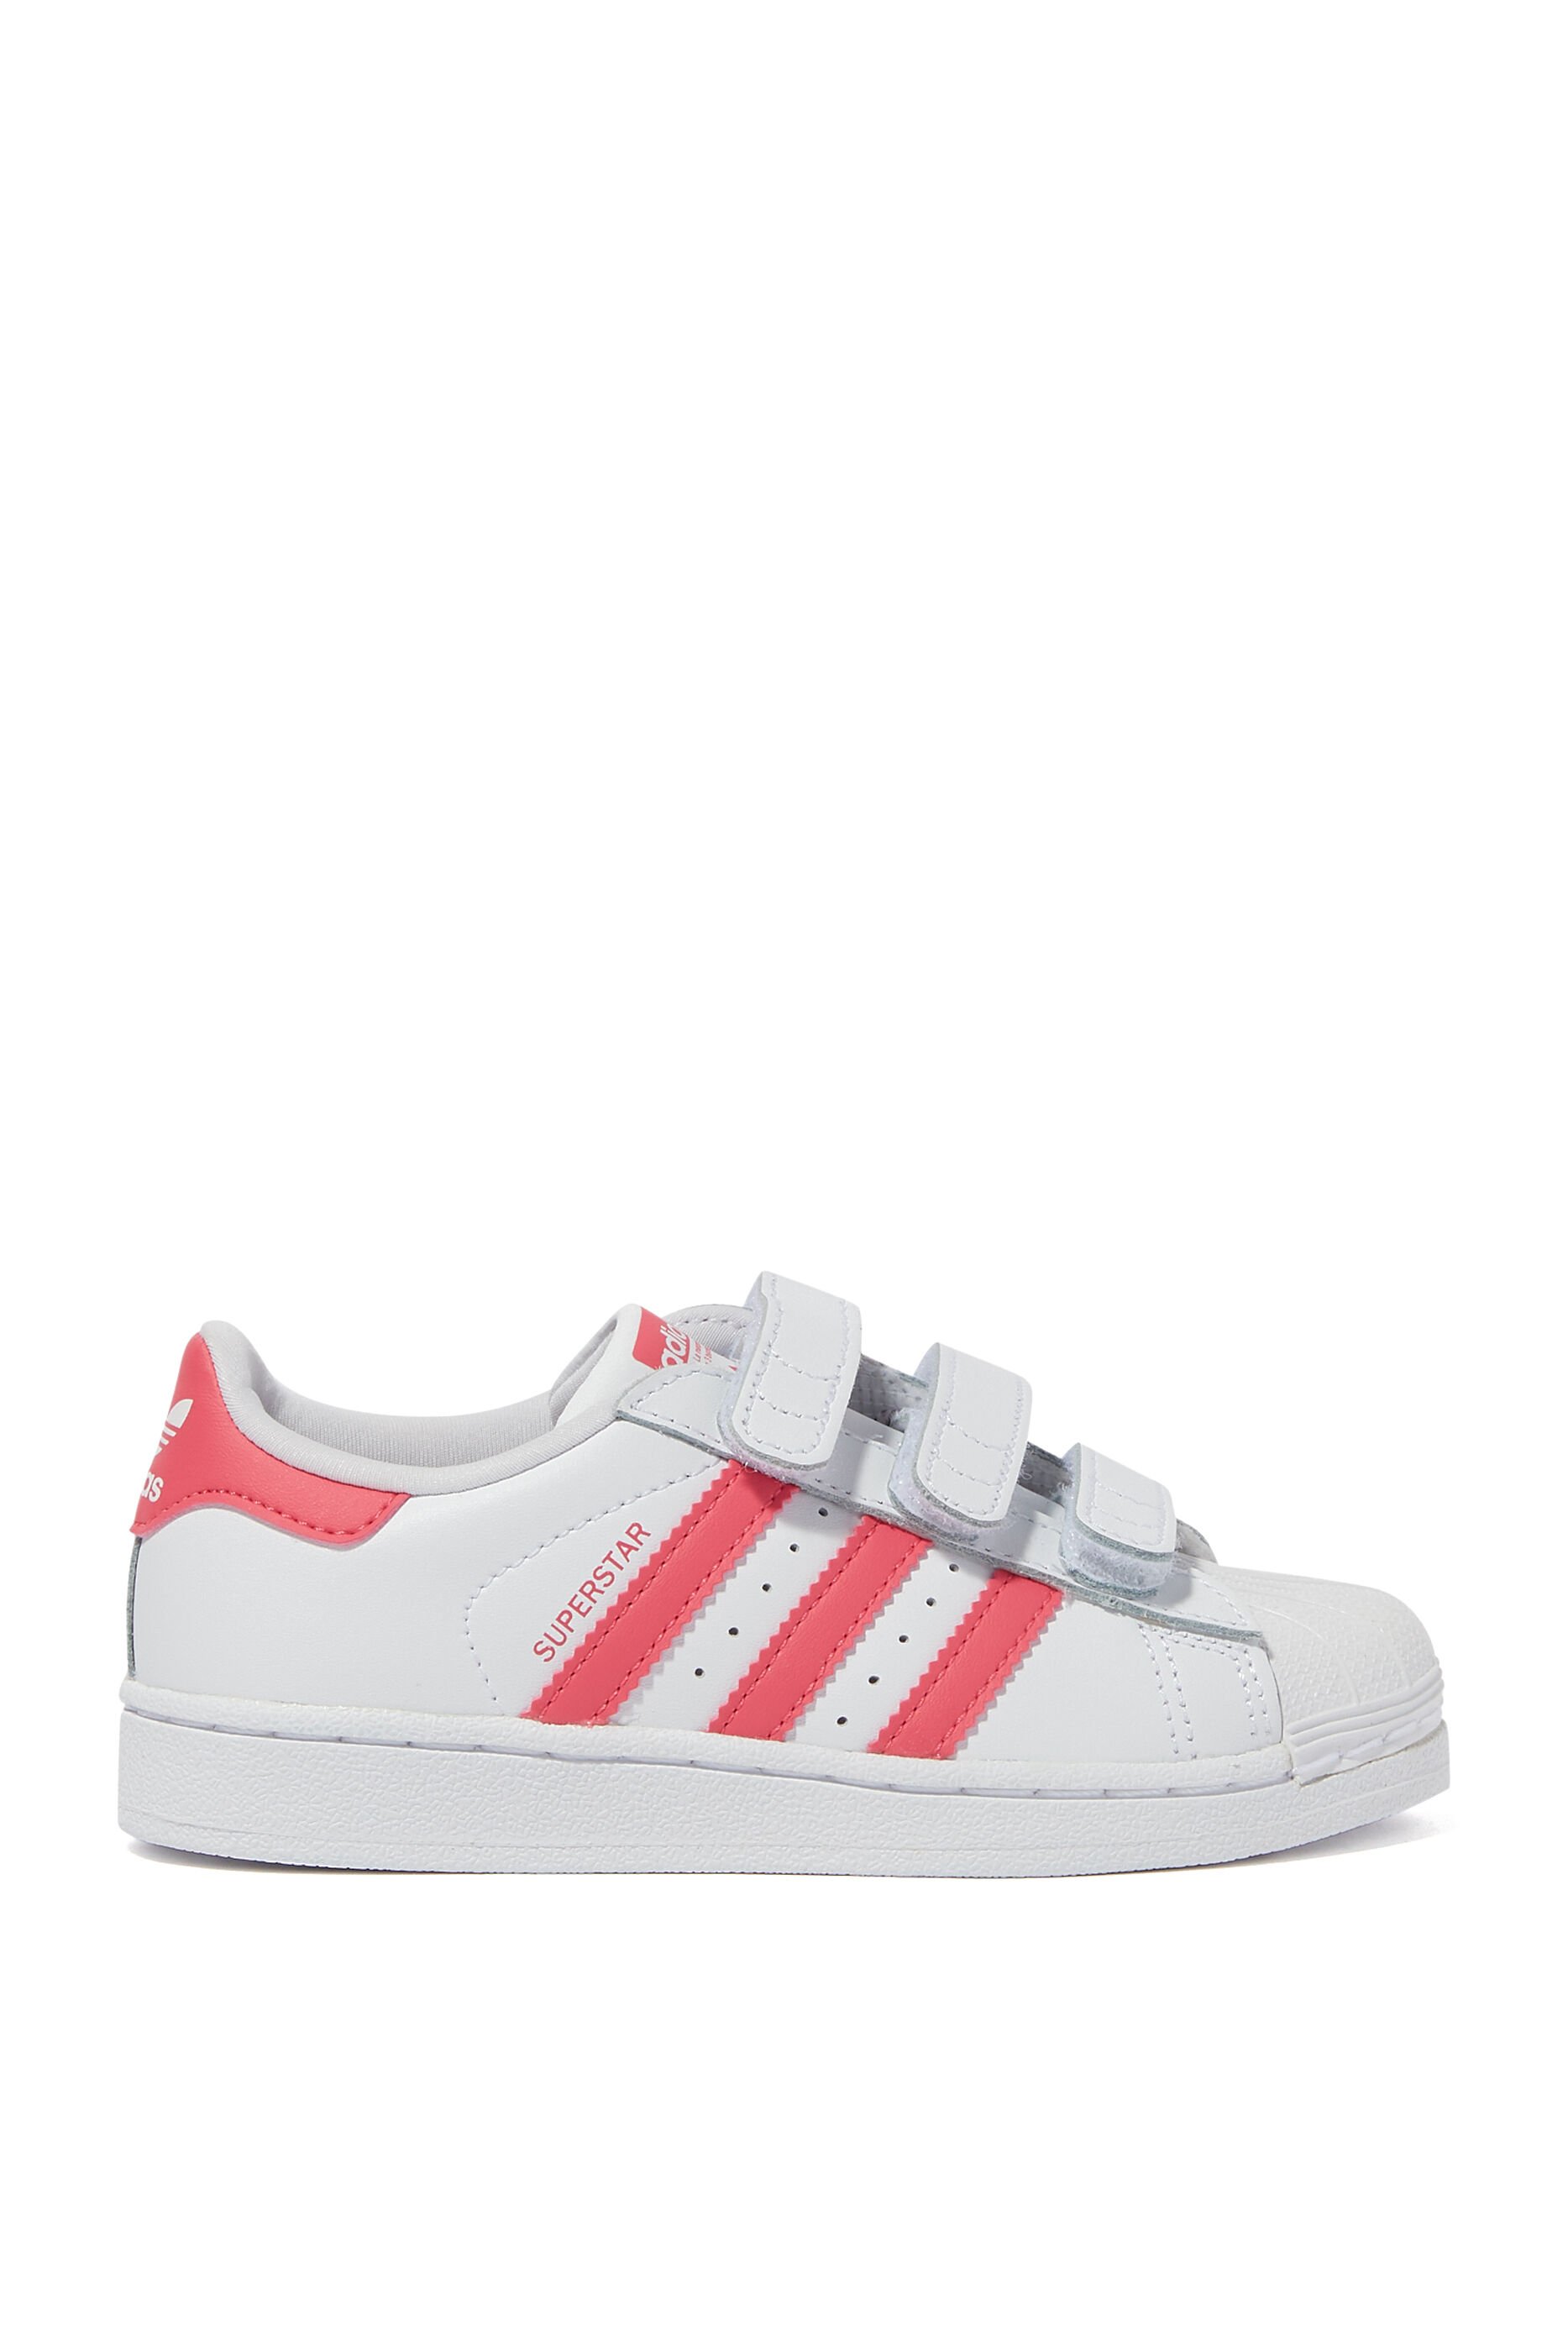 adidas white with pink stripes